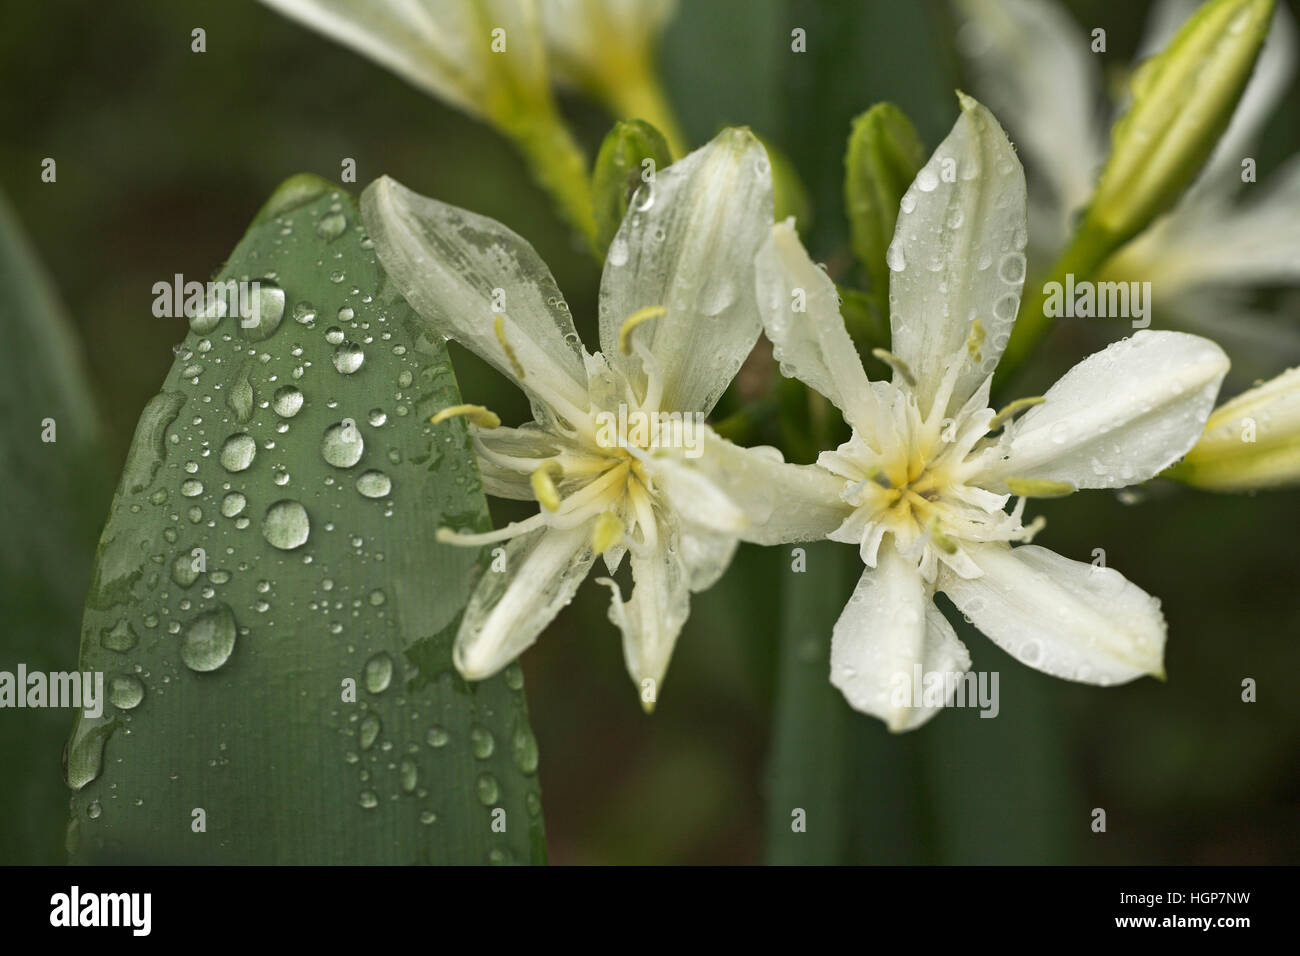 Illyrian Sea Lily Pancratium illyricum flower and leaf with rain drops Corsica France Stock Photo